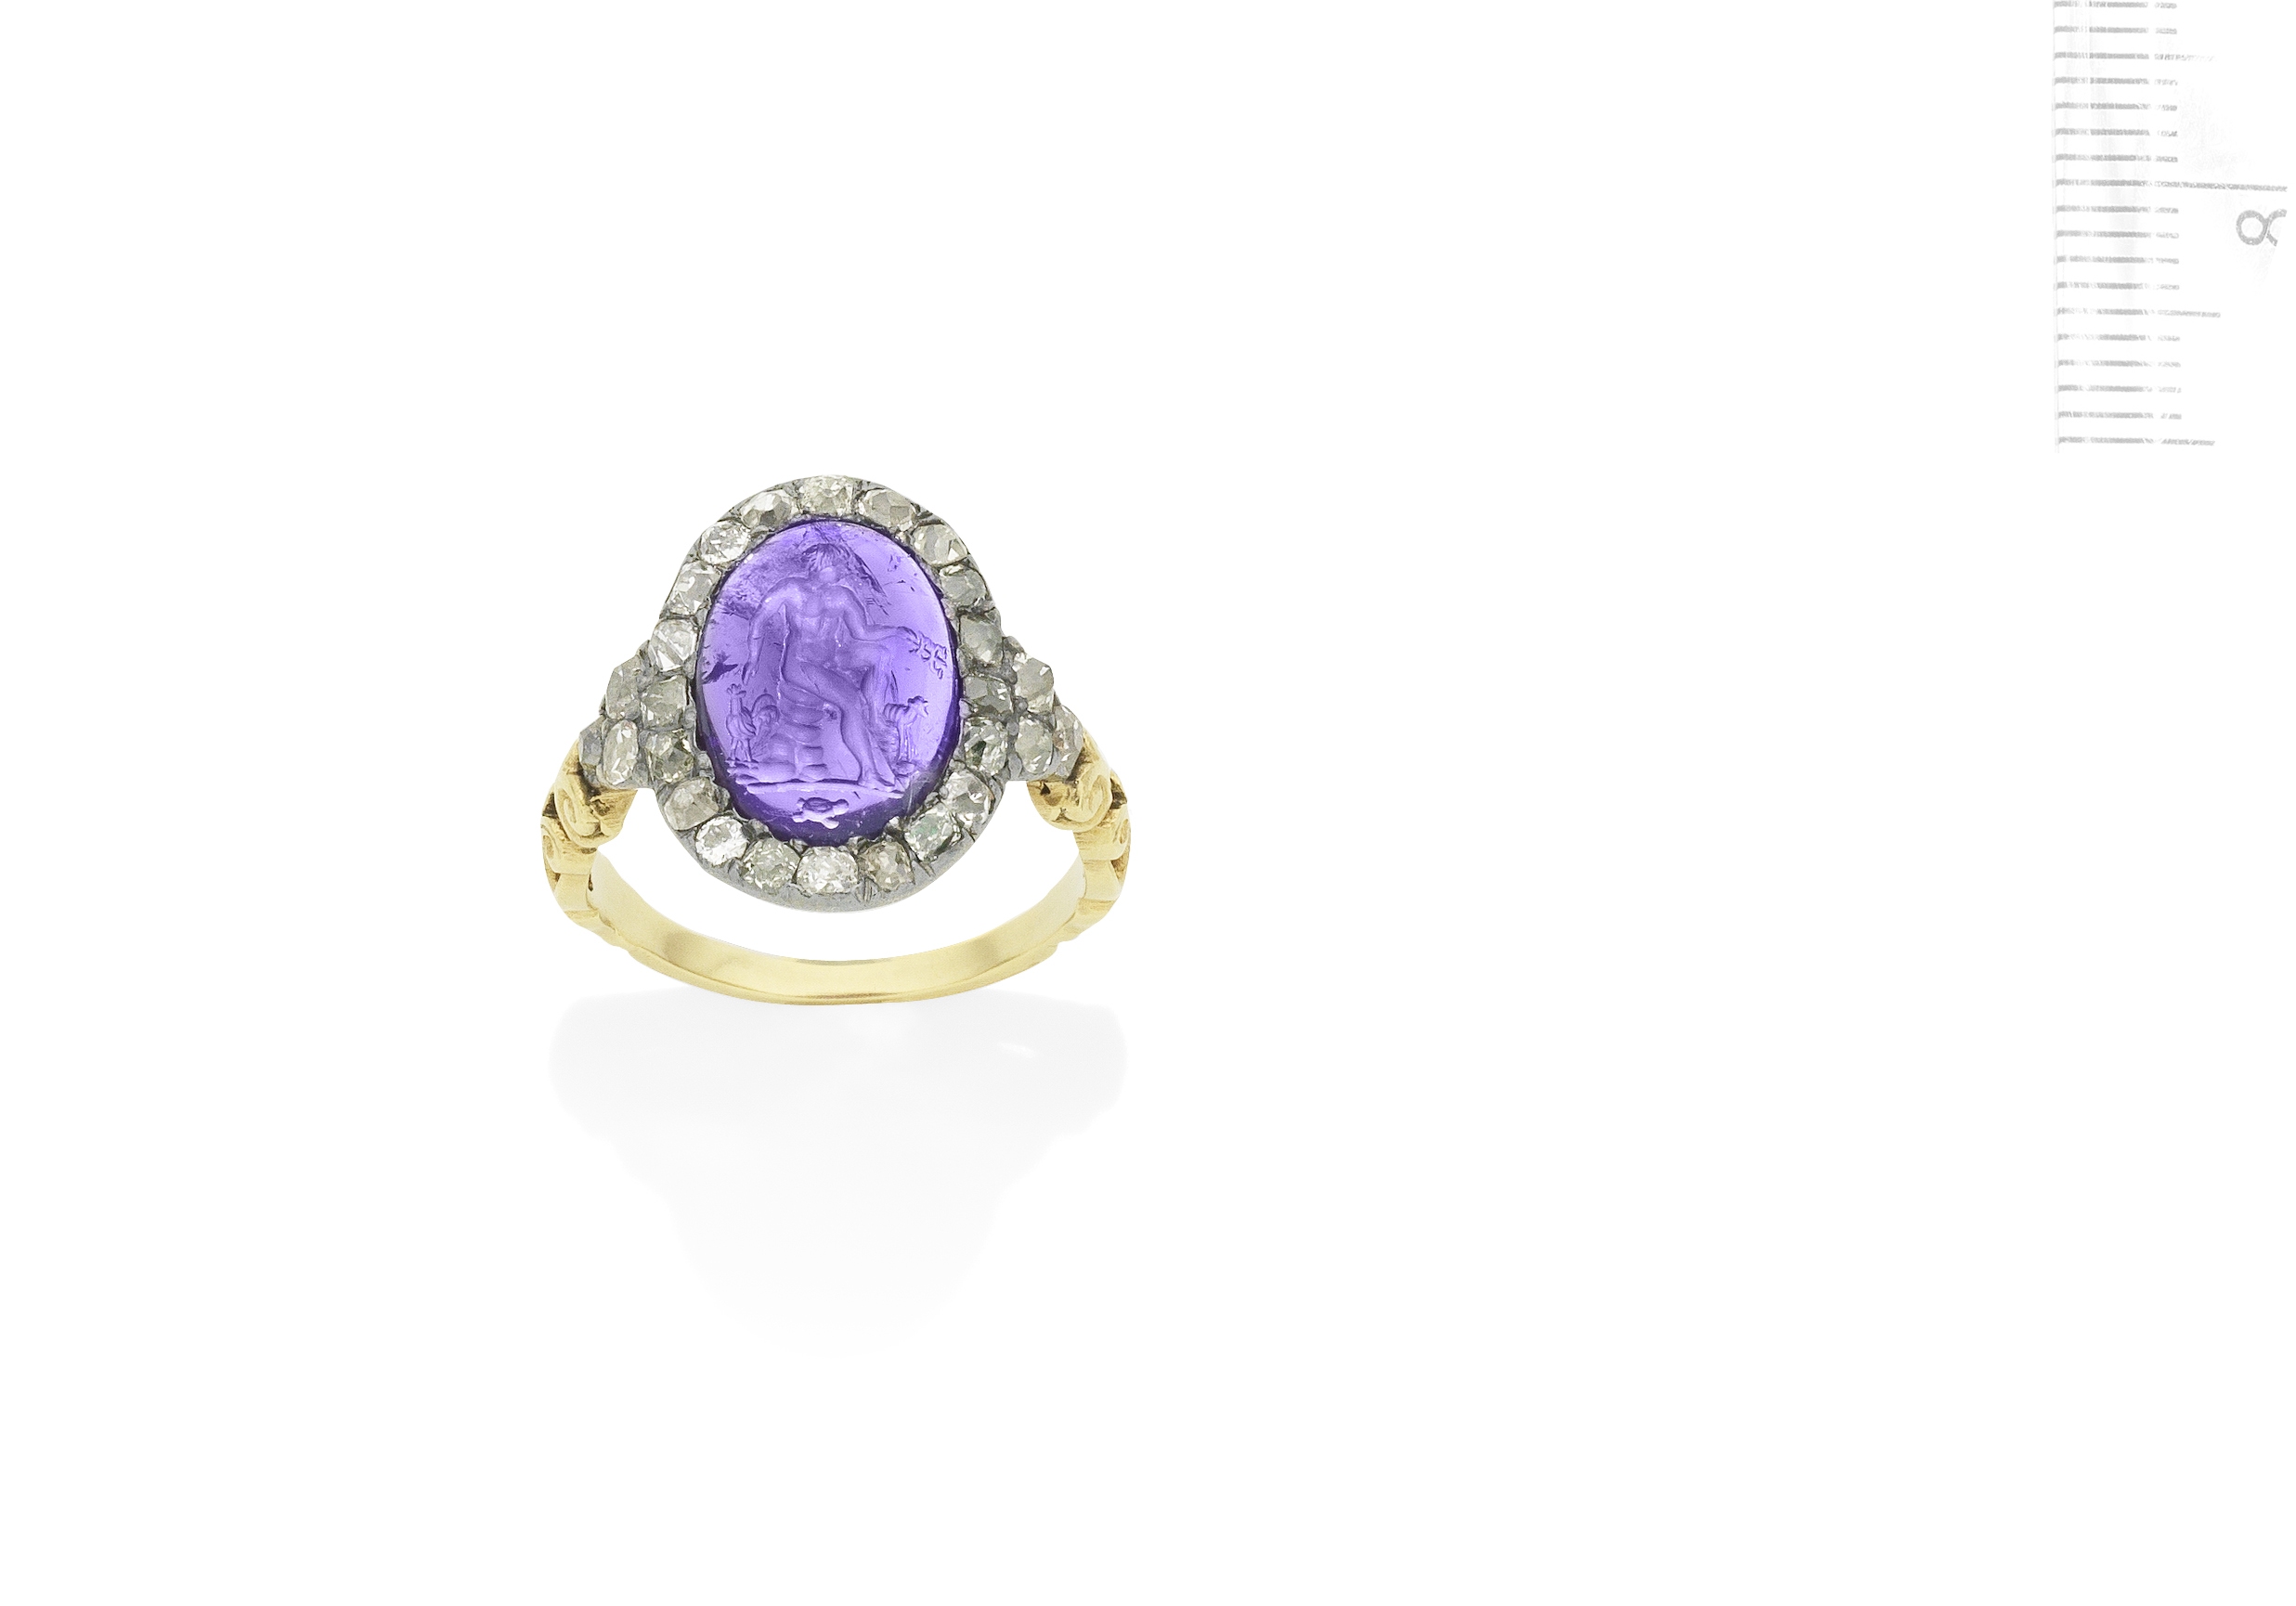 An antique amethyst intaglio and diamond cluster ring